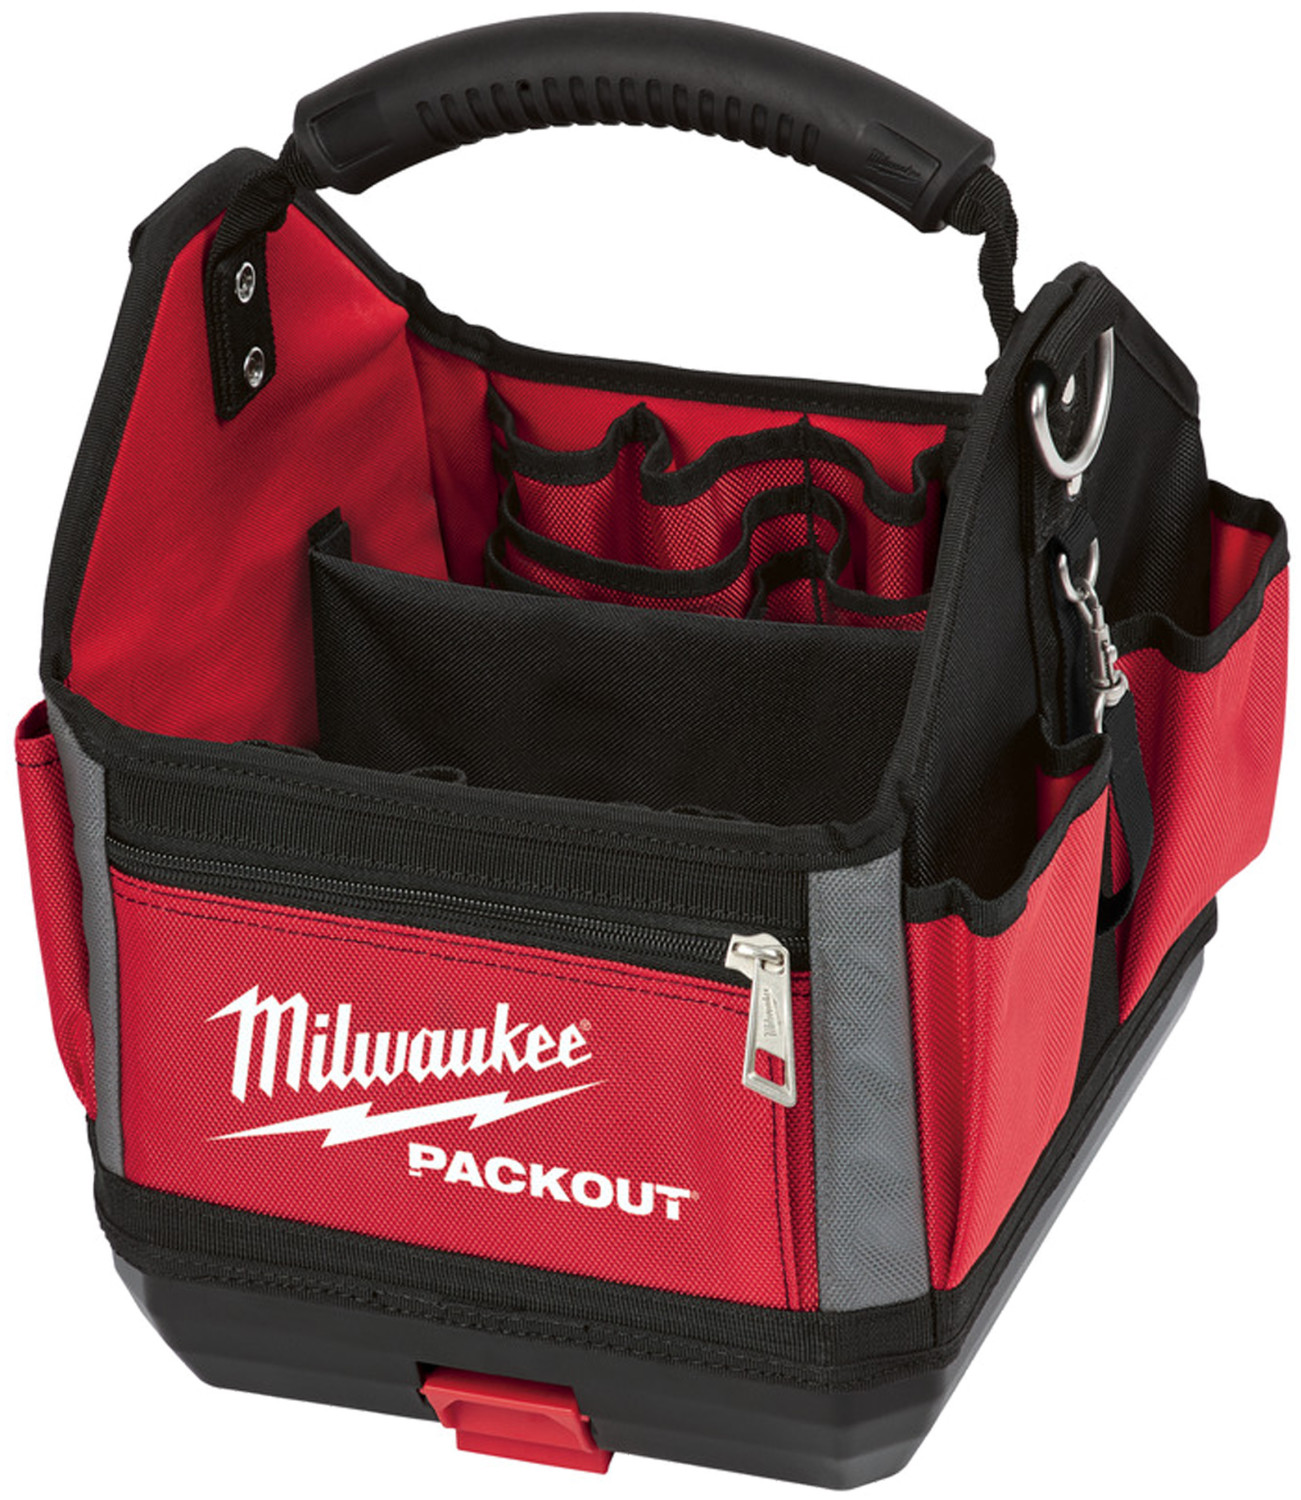 Milwaukee PACKOUT ab € 83,67